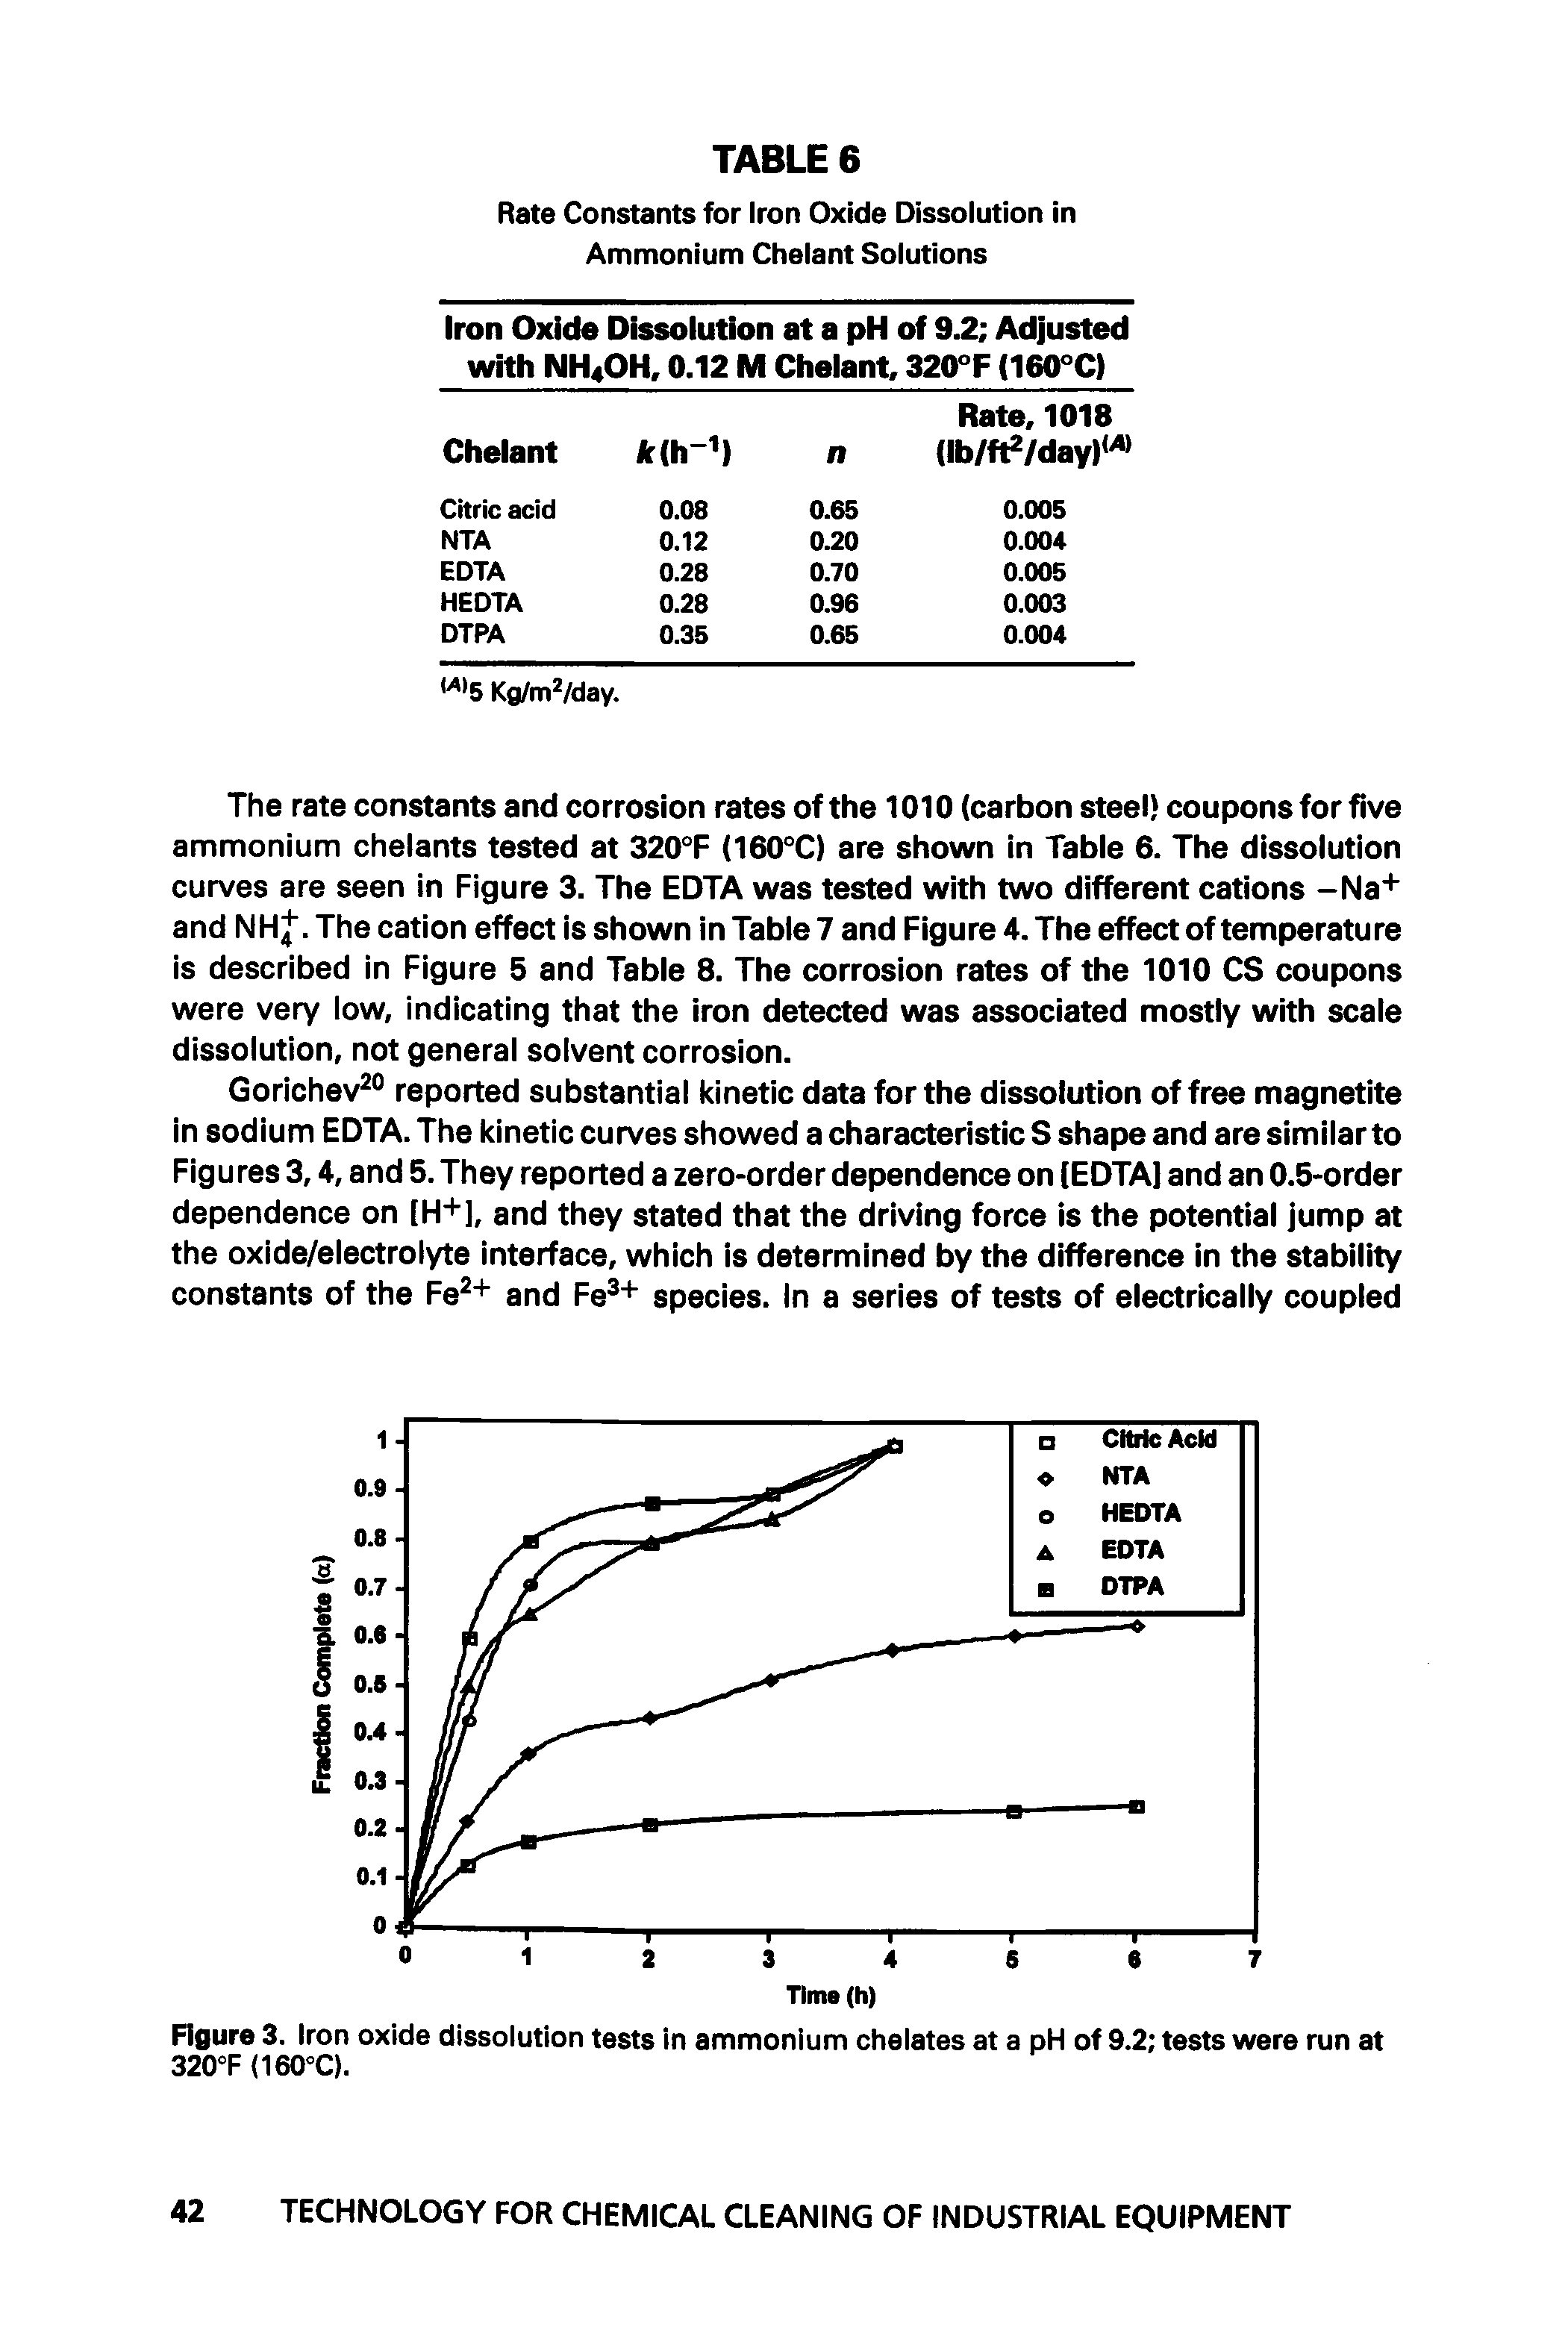 Figure 3. Iron oxide dissolution tests in ammonium chelates at a pH of 9.2 tests were run at 320°F (160°C).